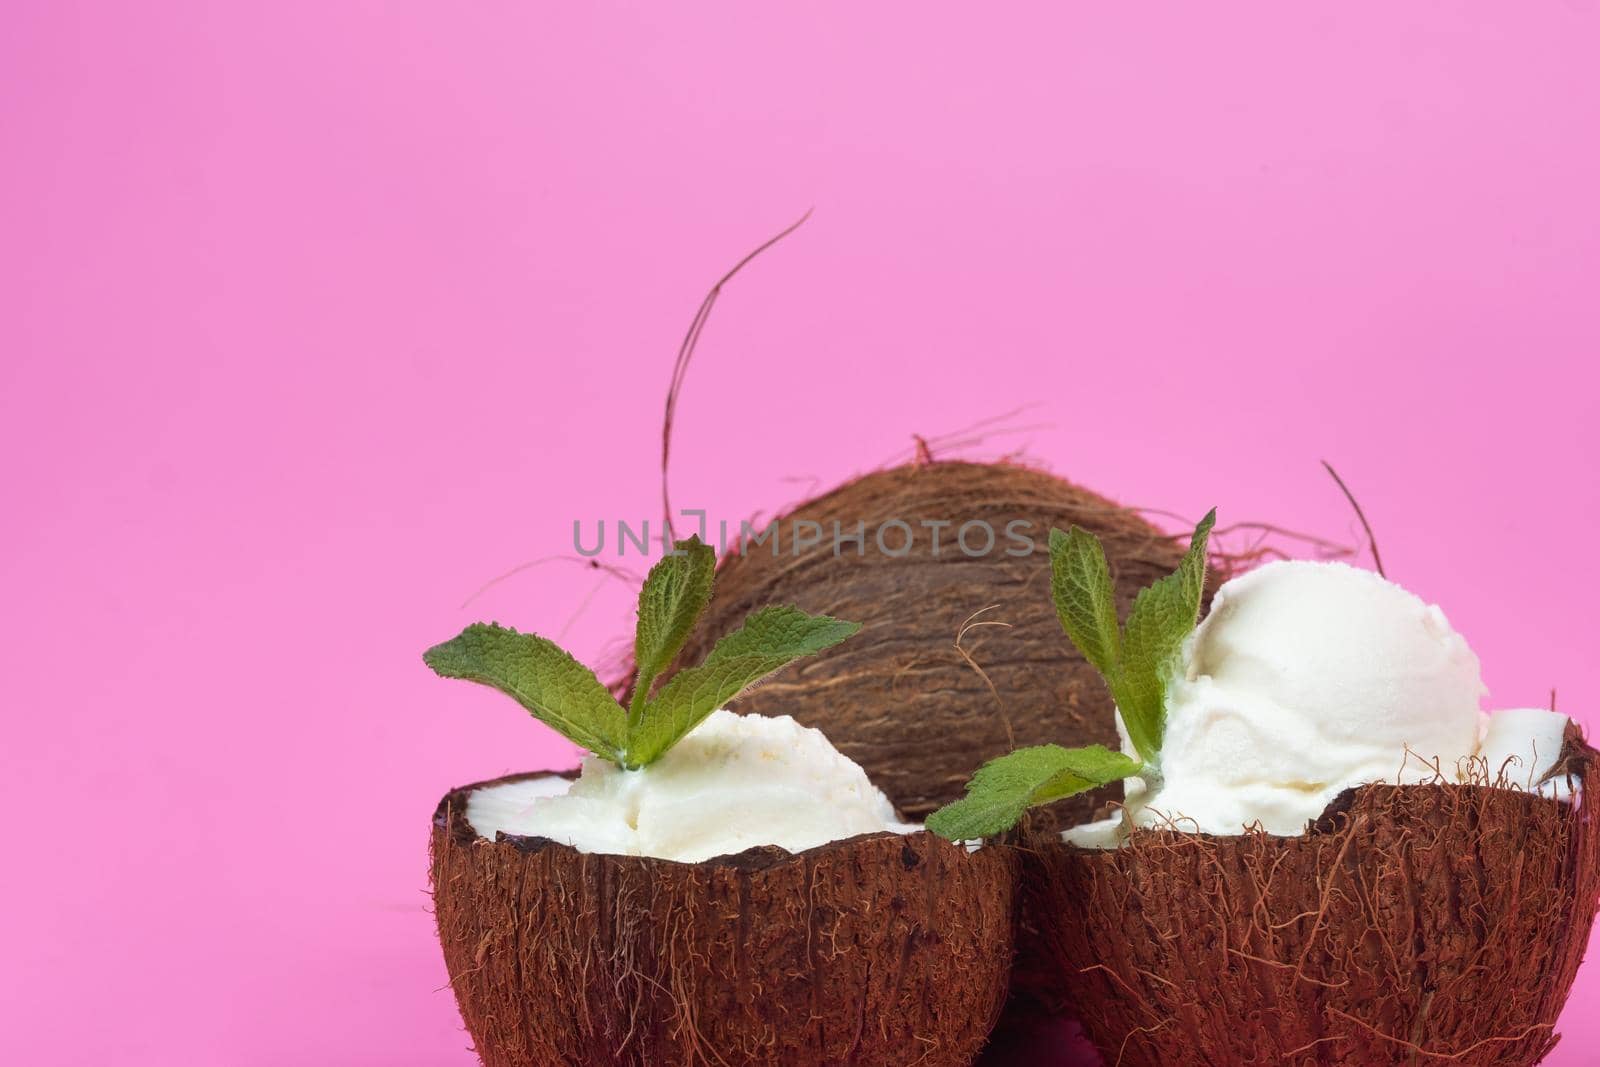 Vanilla ice cream balls in fresh coconut halves decorated with mint leaves on a pink background by Lobachad